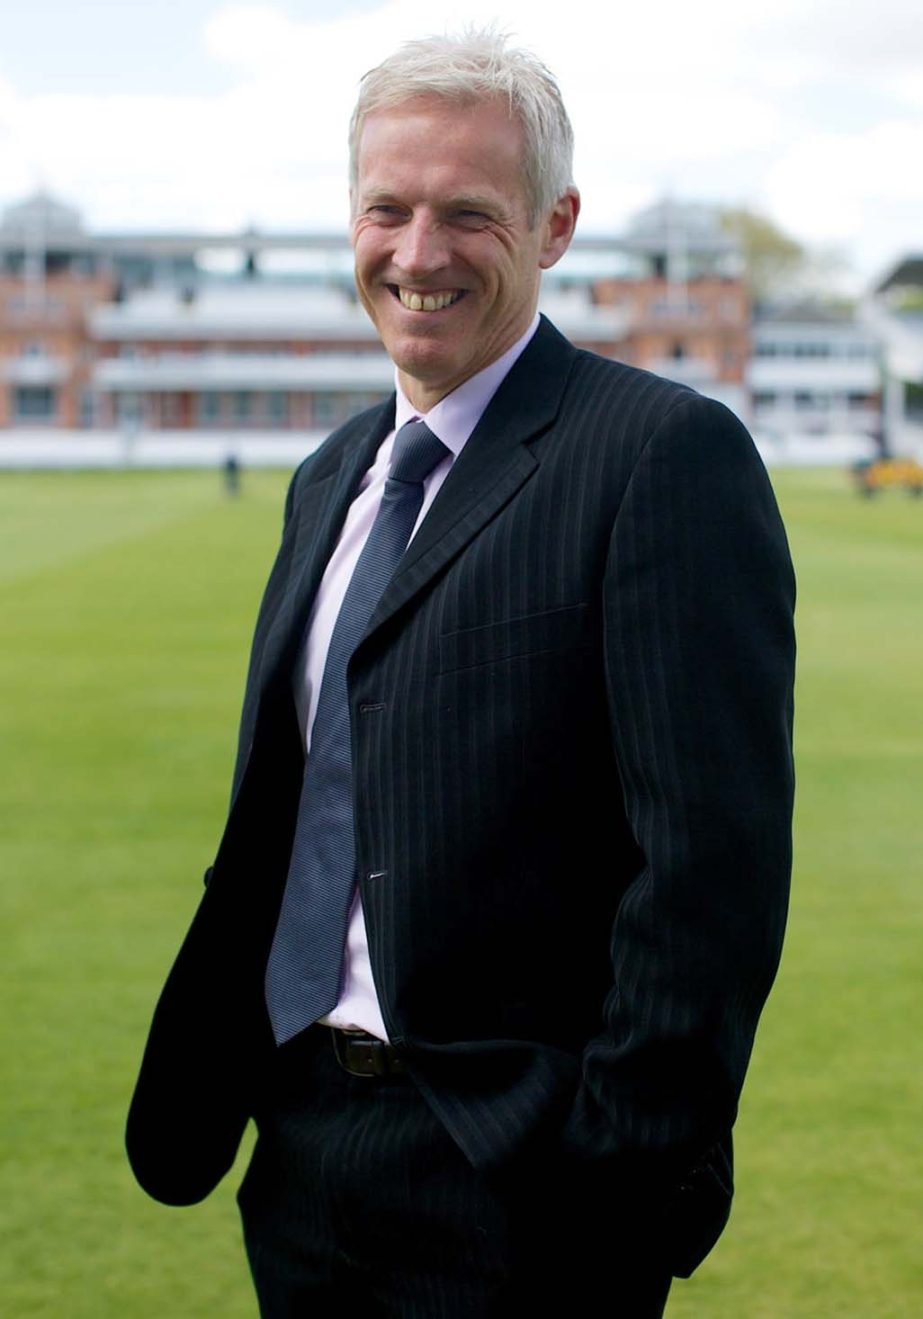 Peter Moores has been reappointed England's head coach, Lord's on Saturday.